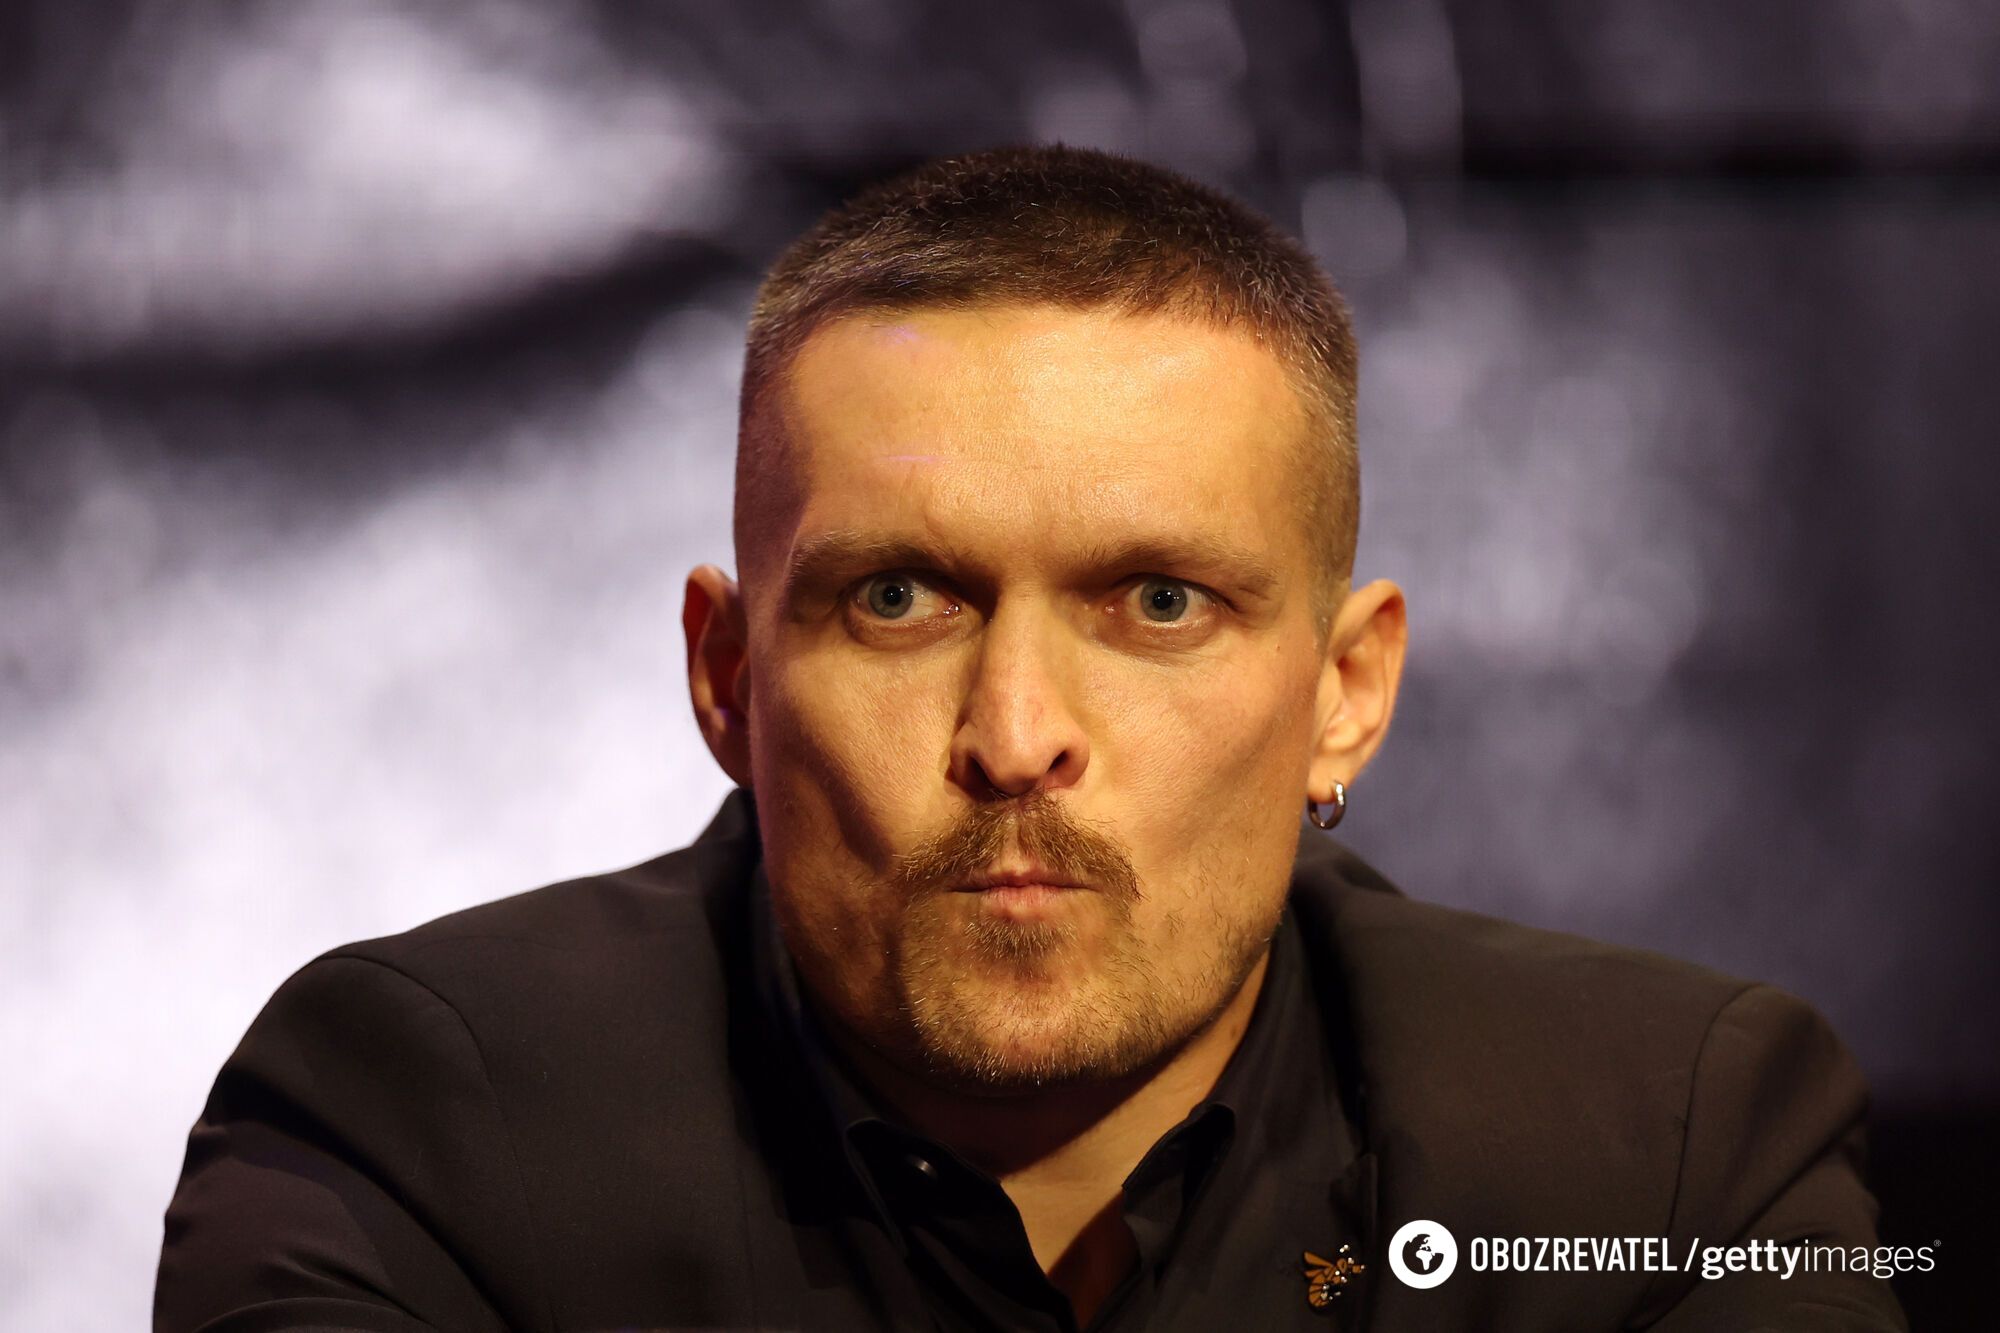 ''Even now he remains underrated'': Lewis shames Usyk's skeptics before Fury fight